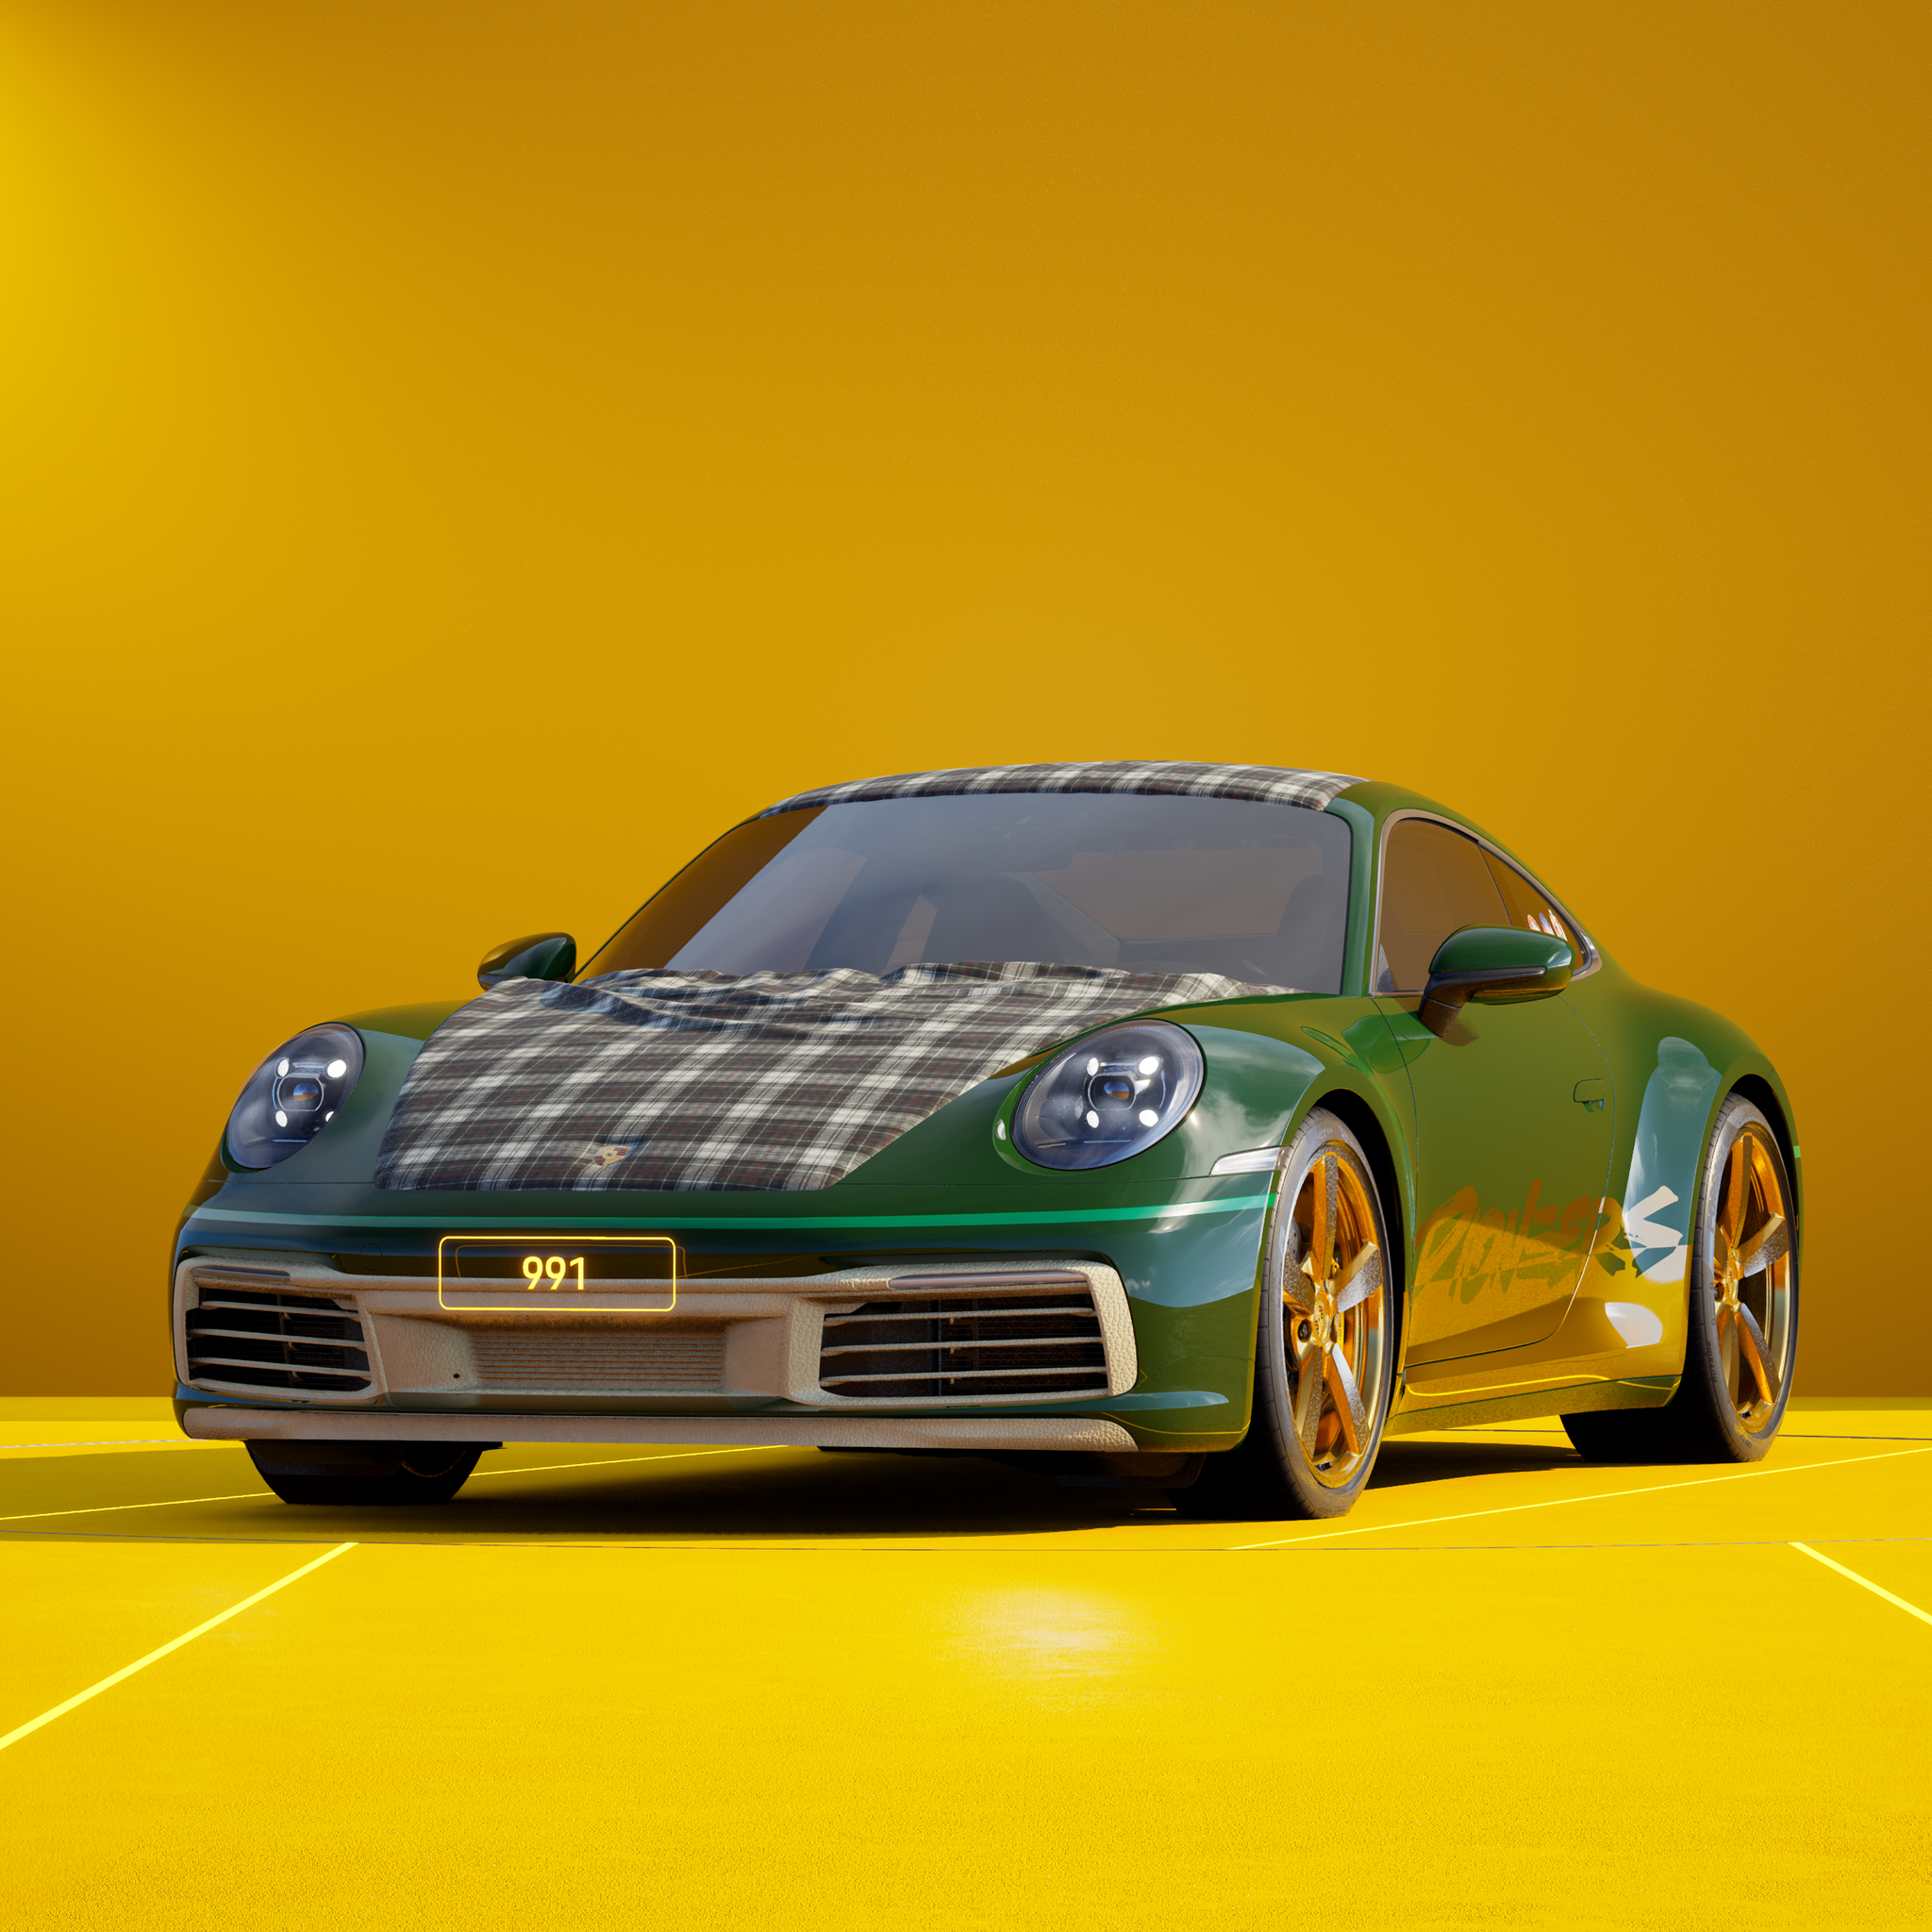 The PORSCHΞ 911 991 image in phase